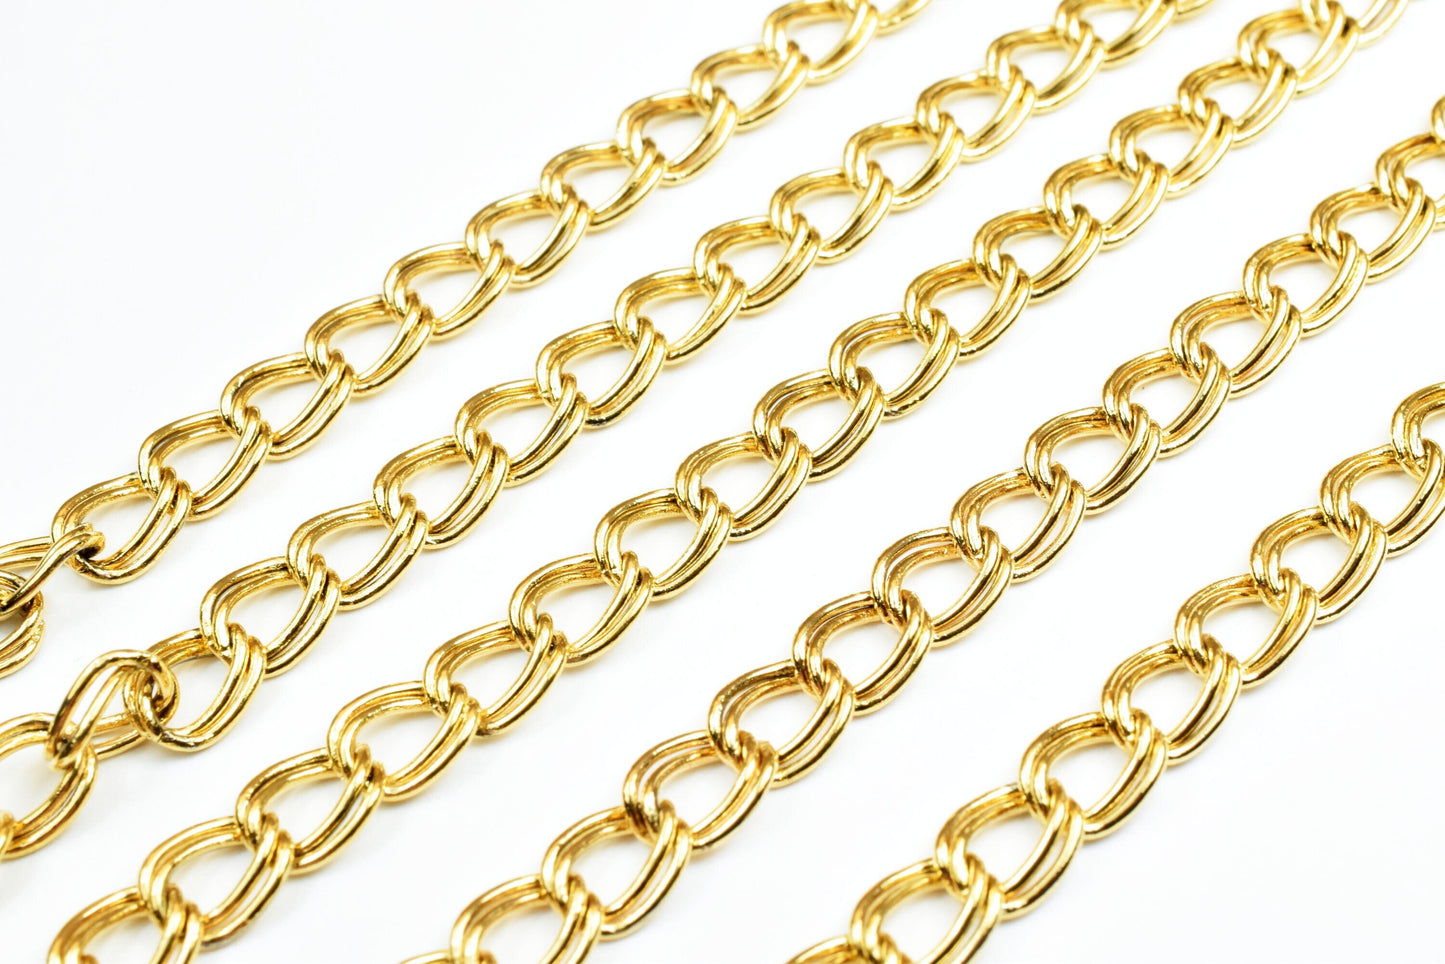 New Gold Plated tarnish resistant double link /parallel chain 18k size 6x2mm for jewelry making gfc47 sold by foot